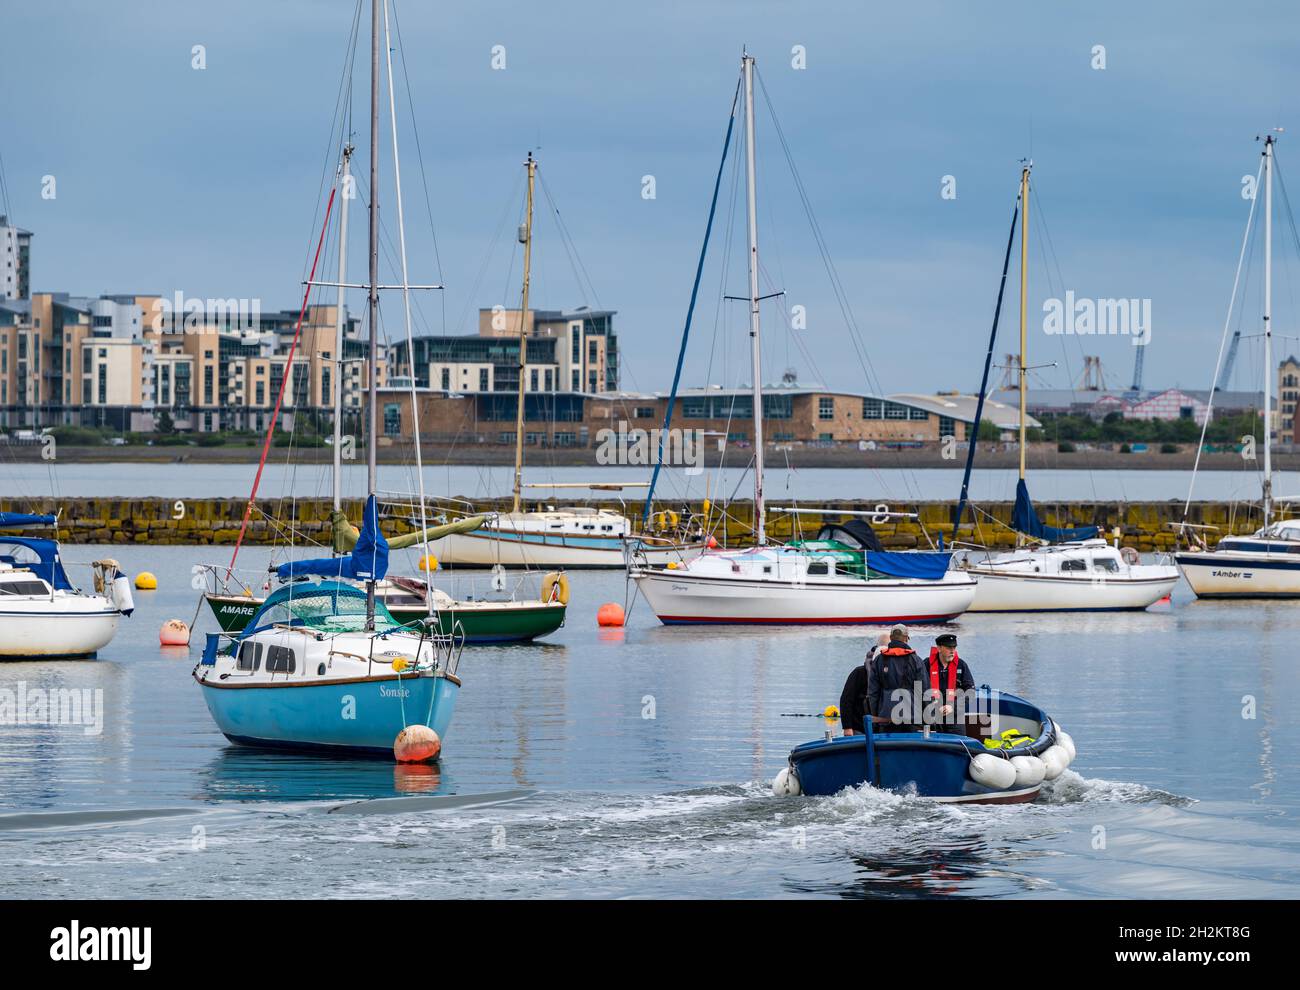 Sailboats in Granton harbour on a sunny day with people in a dinghy, Edinburgh, Scotland, UK Stock Photo